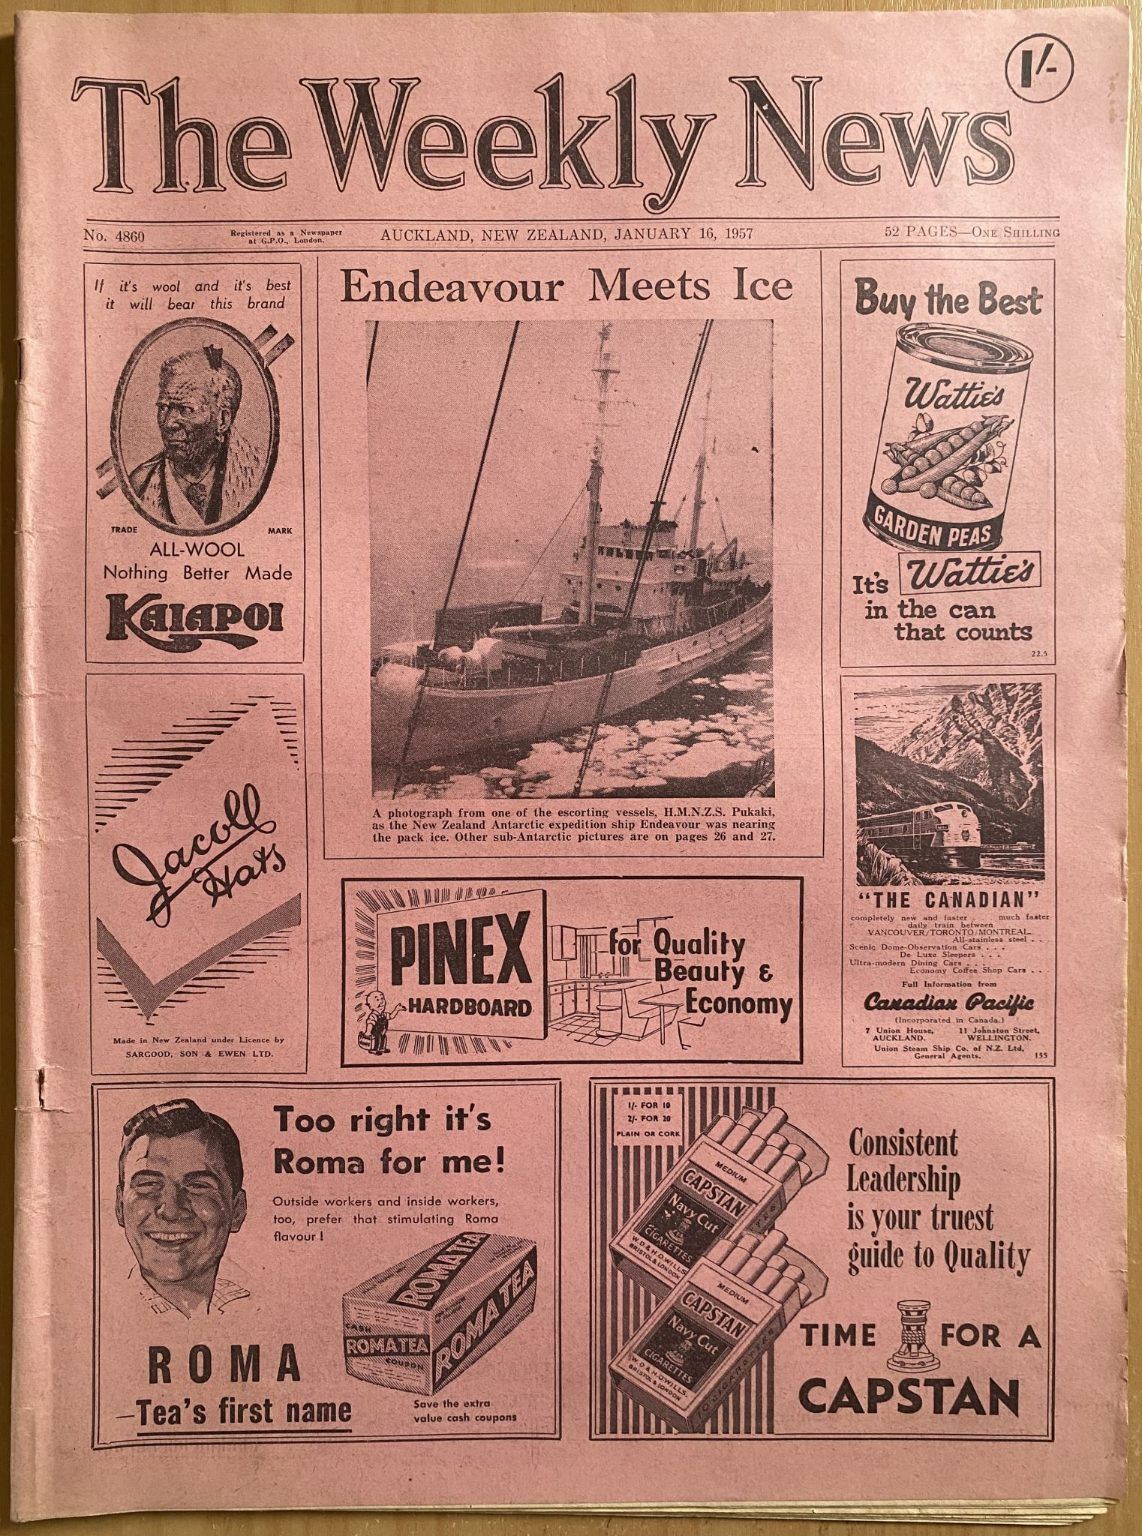 OLD NEWSPAPER: The Weekly News, No. 4860, 16 January 1957